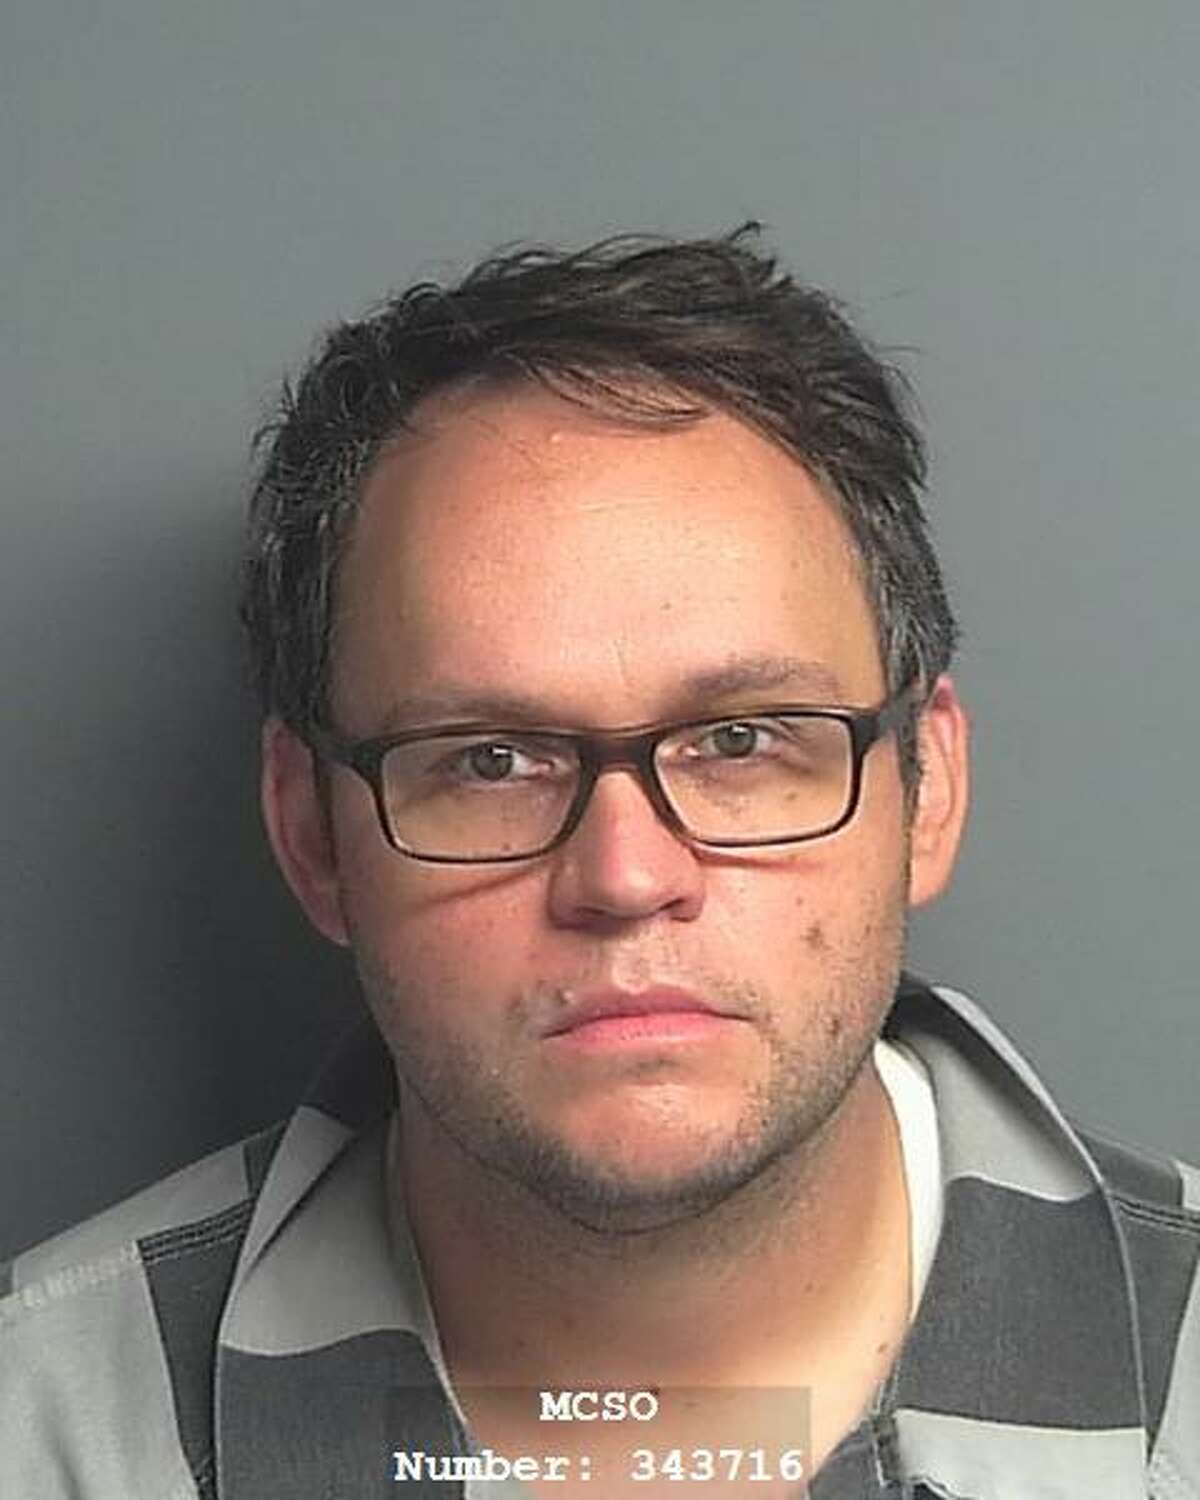 Graham James Butler, 37, of Spring, is being charged with promotion of child pornography, a second-degree felony.